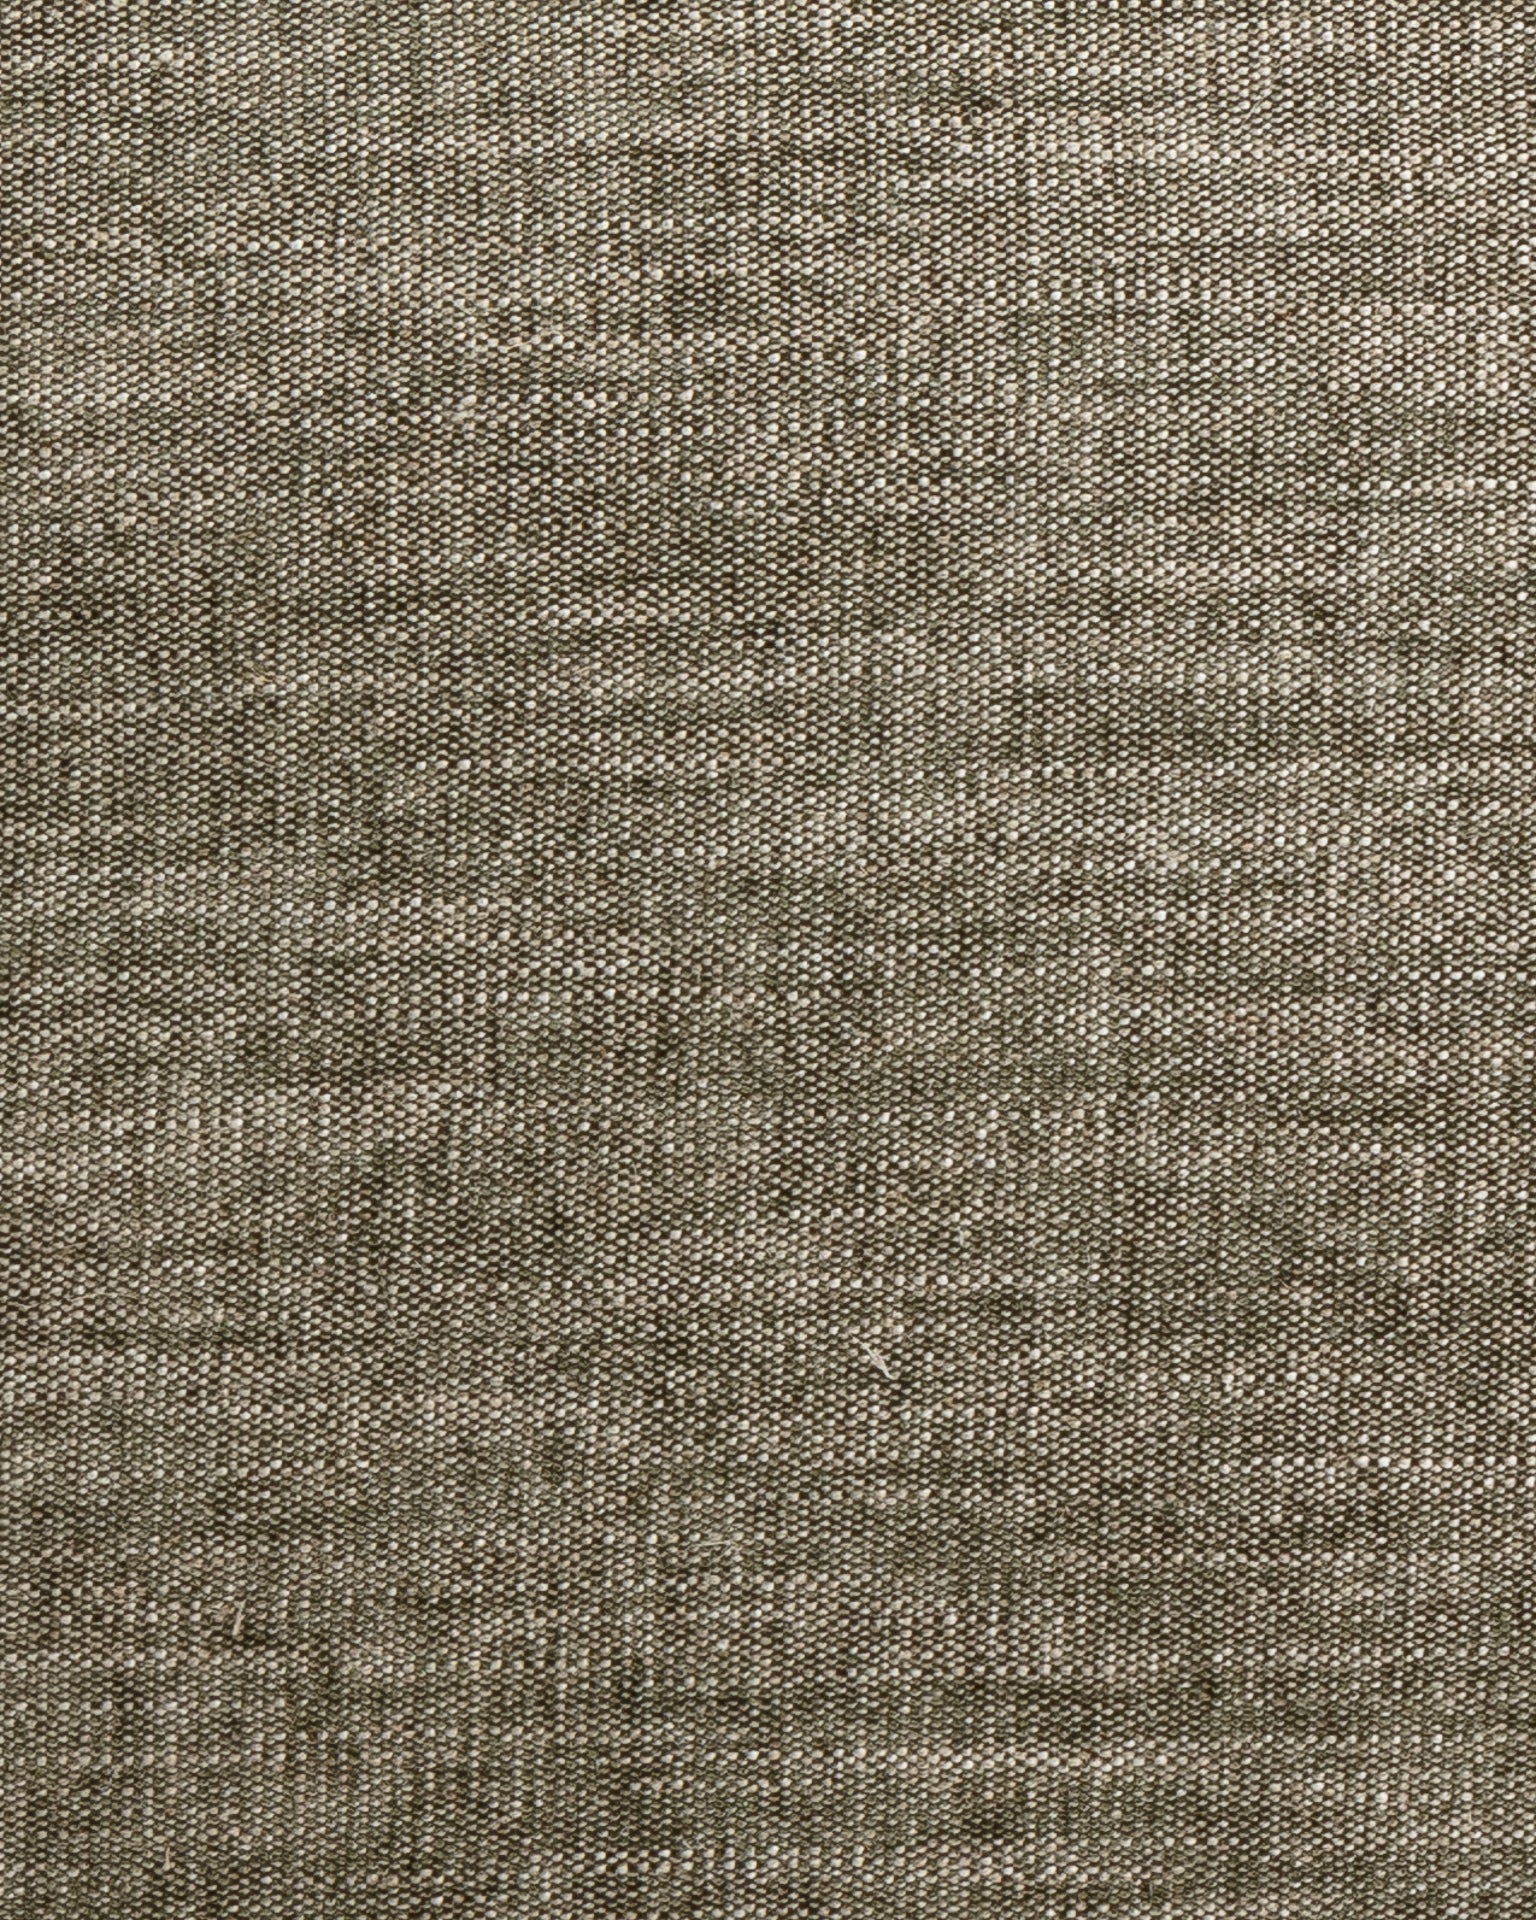 Close-up texture of a Beached Ivy 24x24&quot; woven fabric with a detailed, subtle Arizona-style pattern in shades of beige and brown, showing fine threads and slight variations in color by Gabby.